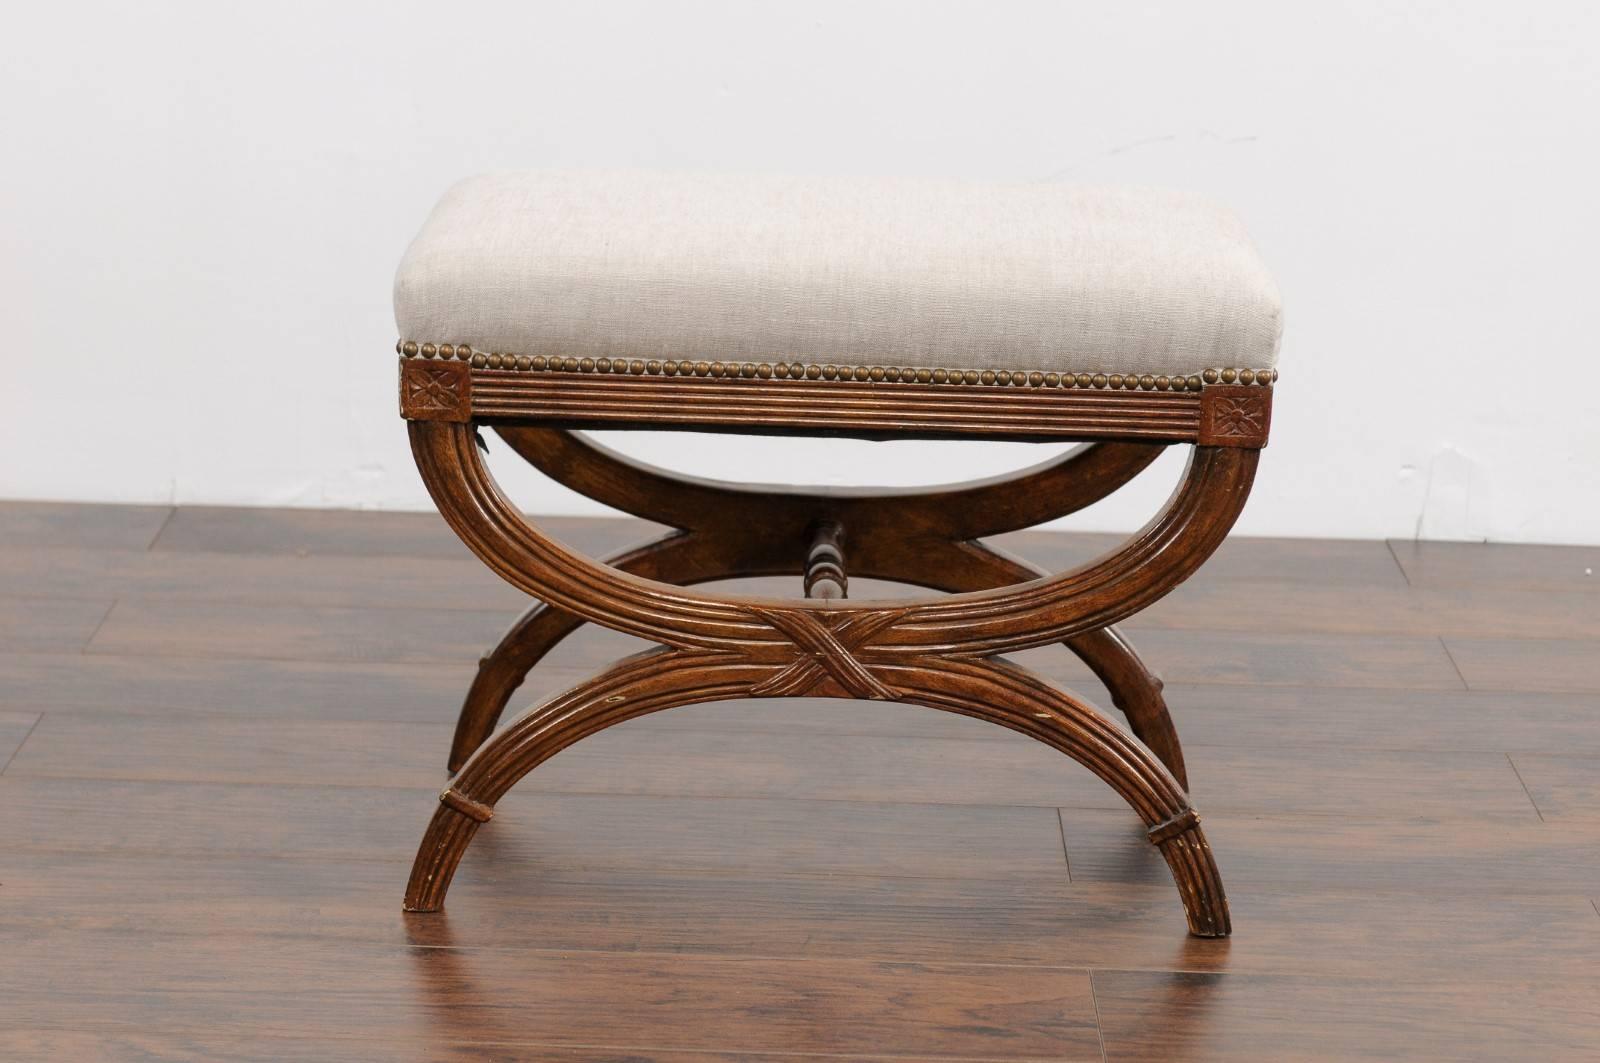 20th Century Vintage Italian Neoclassical Style 1950s Carved and Grain-Painted X-Form Stool